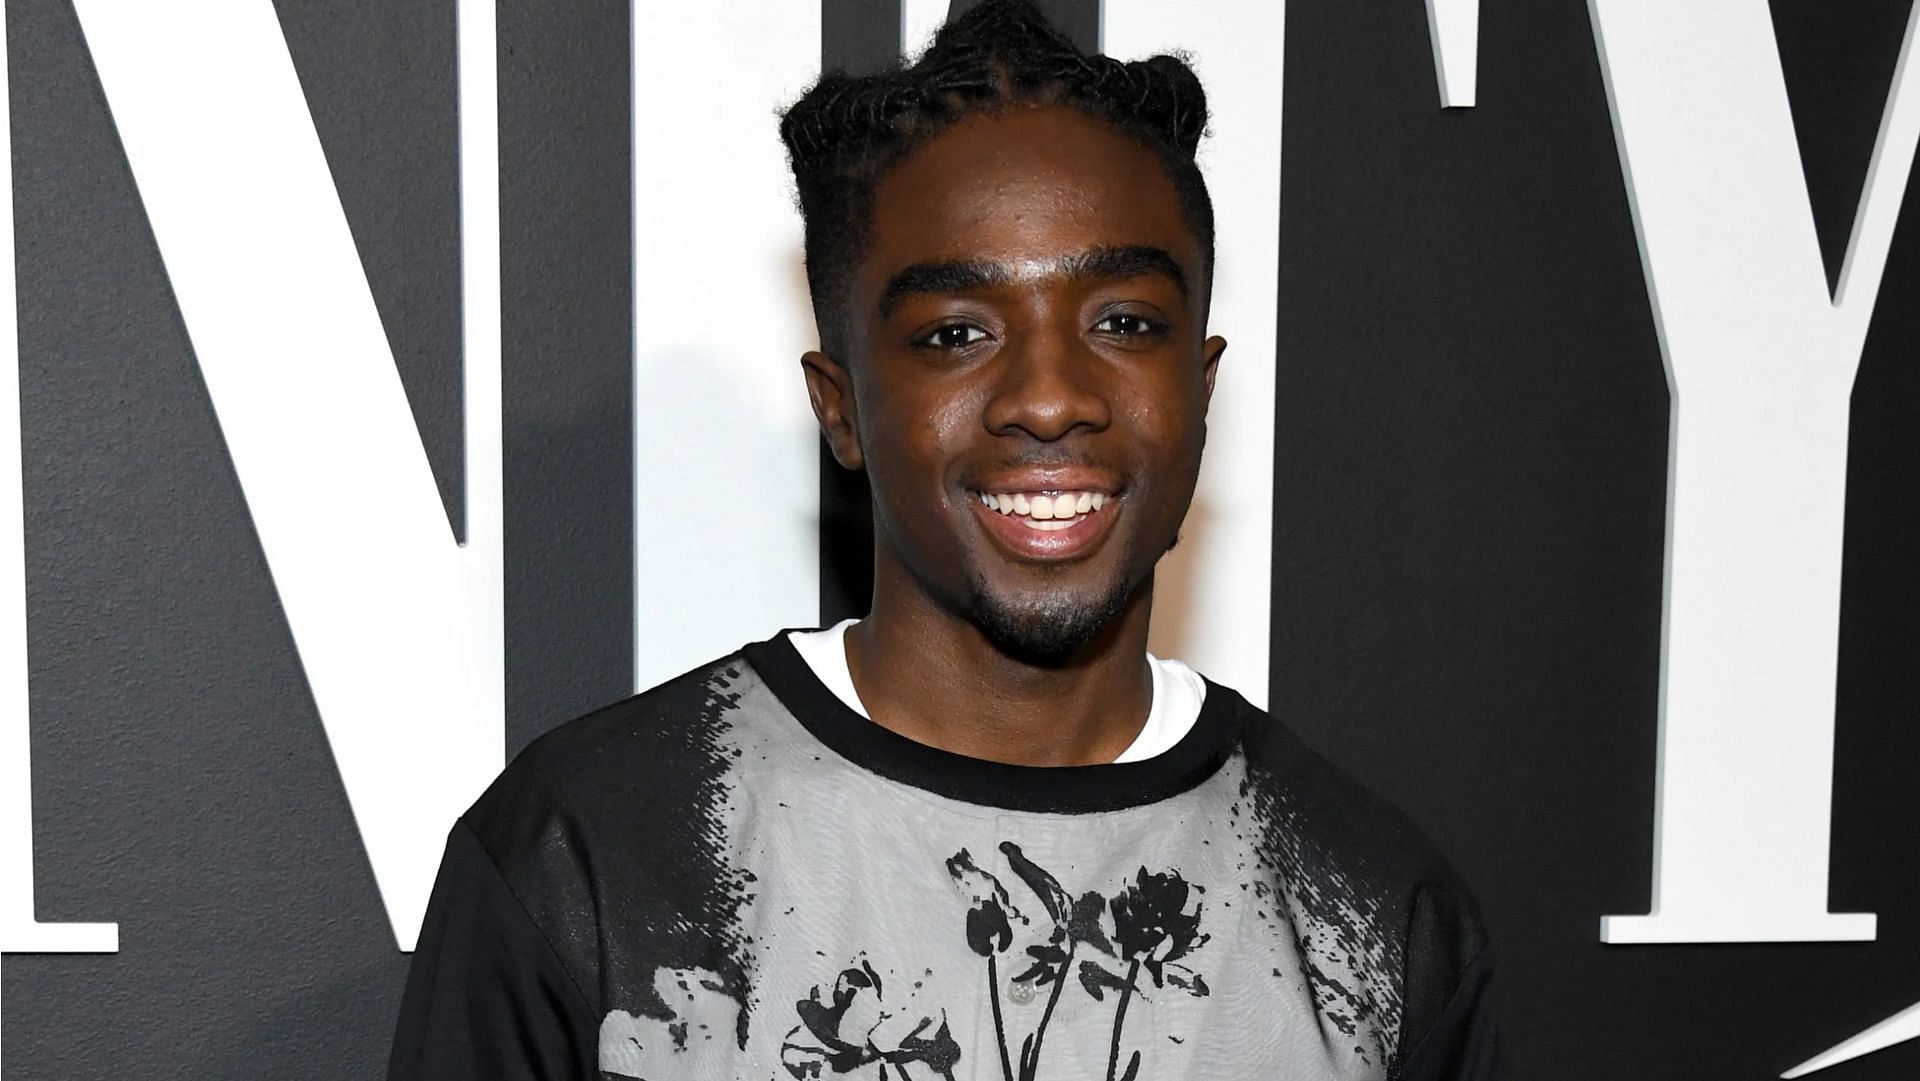 Caleb McLaughlin is one of the many celebrities to have spoken on experiencing racism. (Image via Jon Kopaloff/Getty)